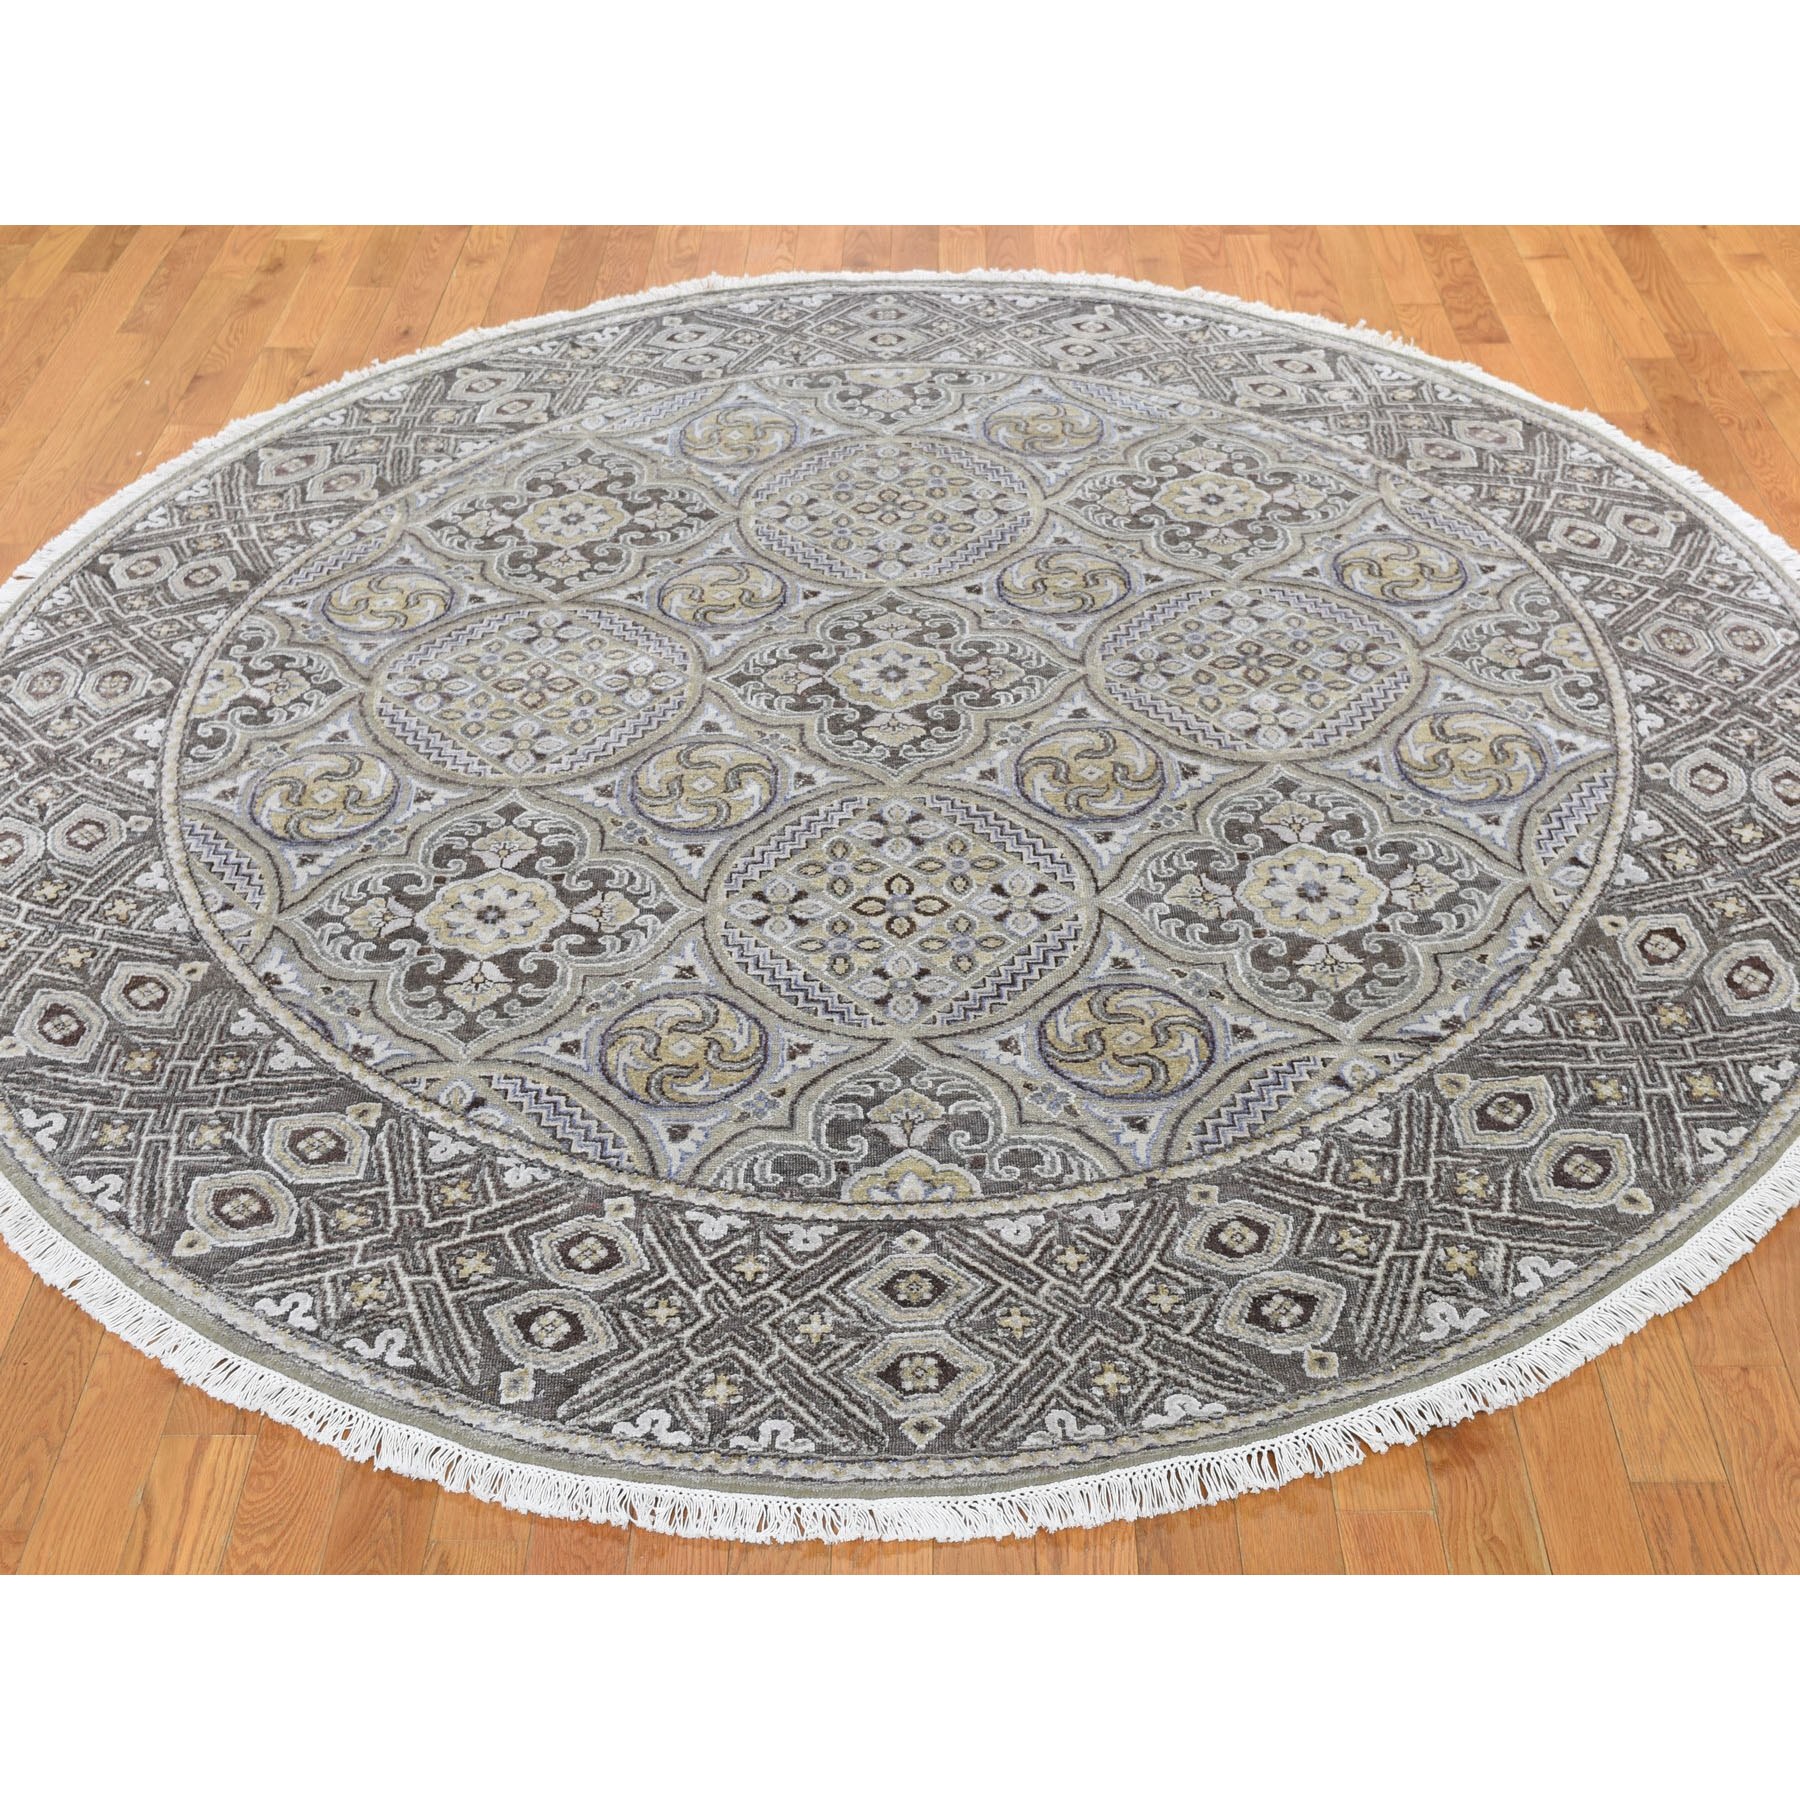 Transitional Wool Hand-Knotted Area Rug 7'10